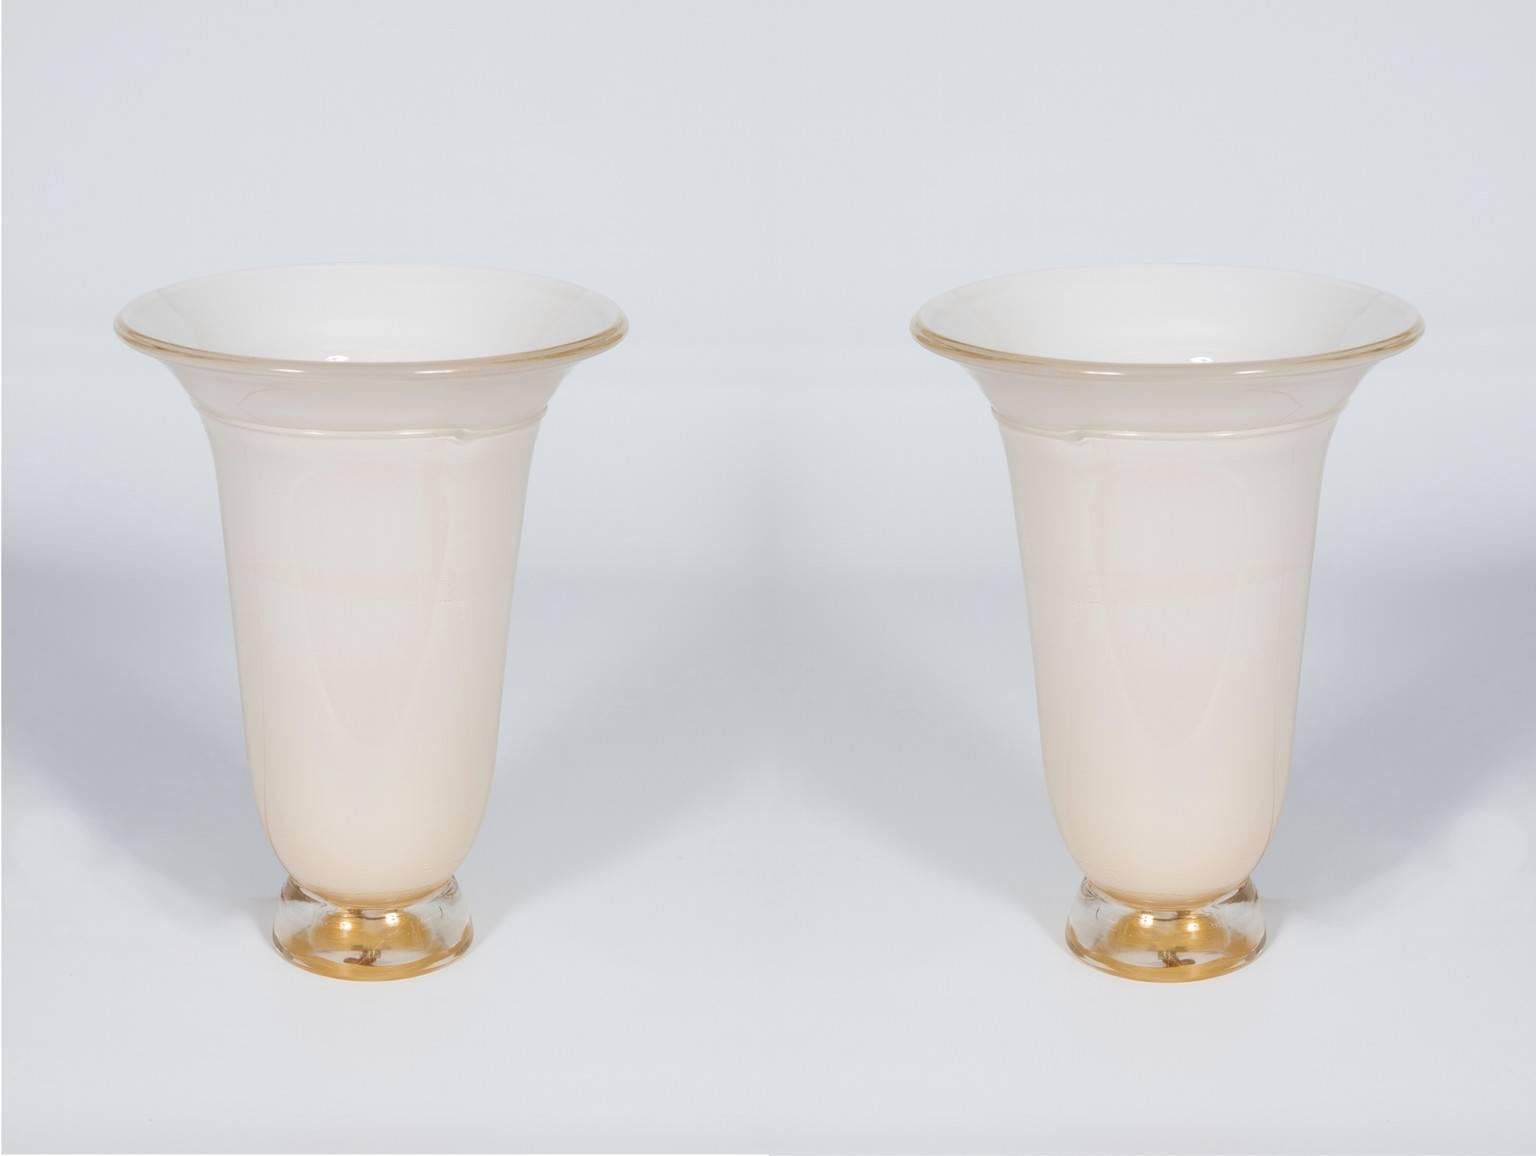 Italian Venetian, Pair of Table Lamps, in blown Murano Glass, White & Gold, attributed to Barovier, 1980s.
This is a unique set, of handcrafted blown Murano glass table lamps, in a shape of a vase, white milk color submersed in a gold thin layer of